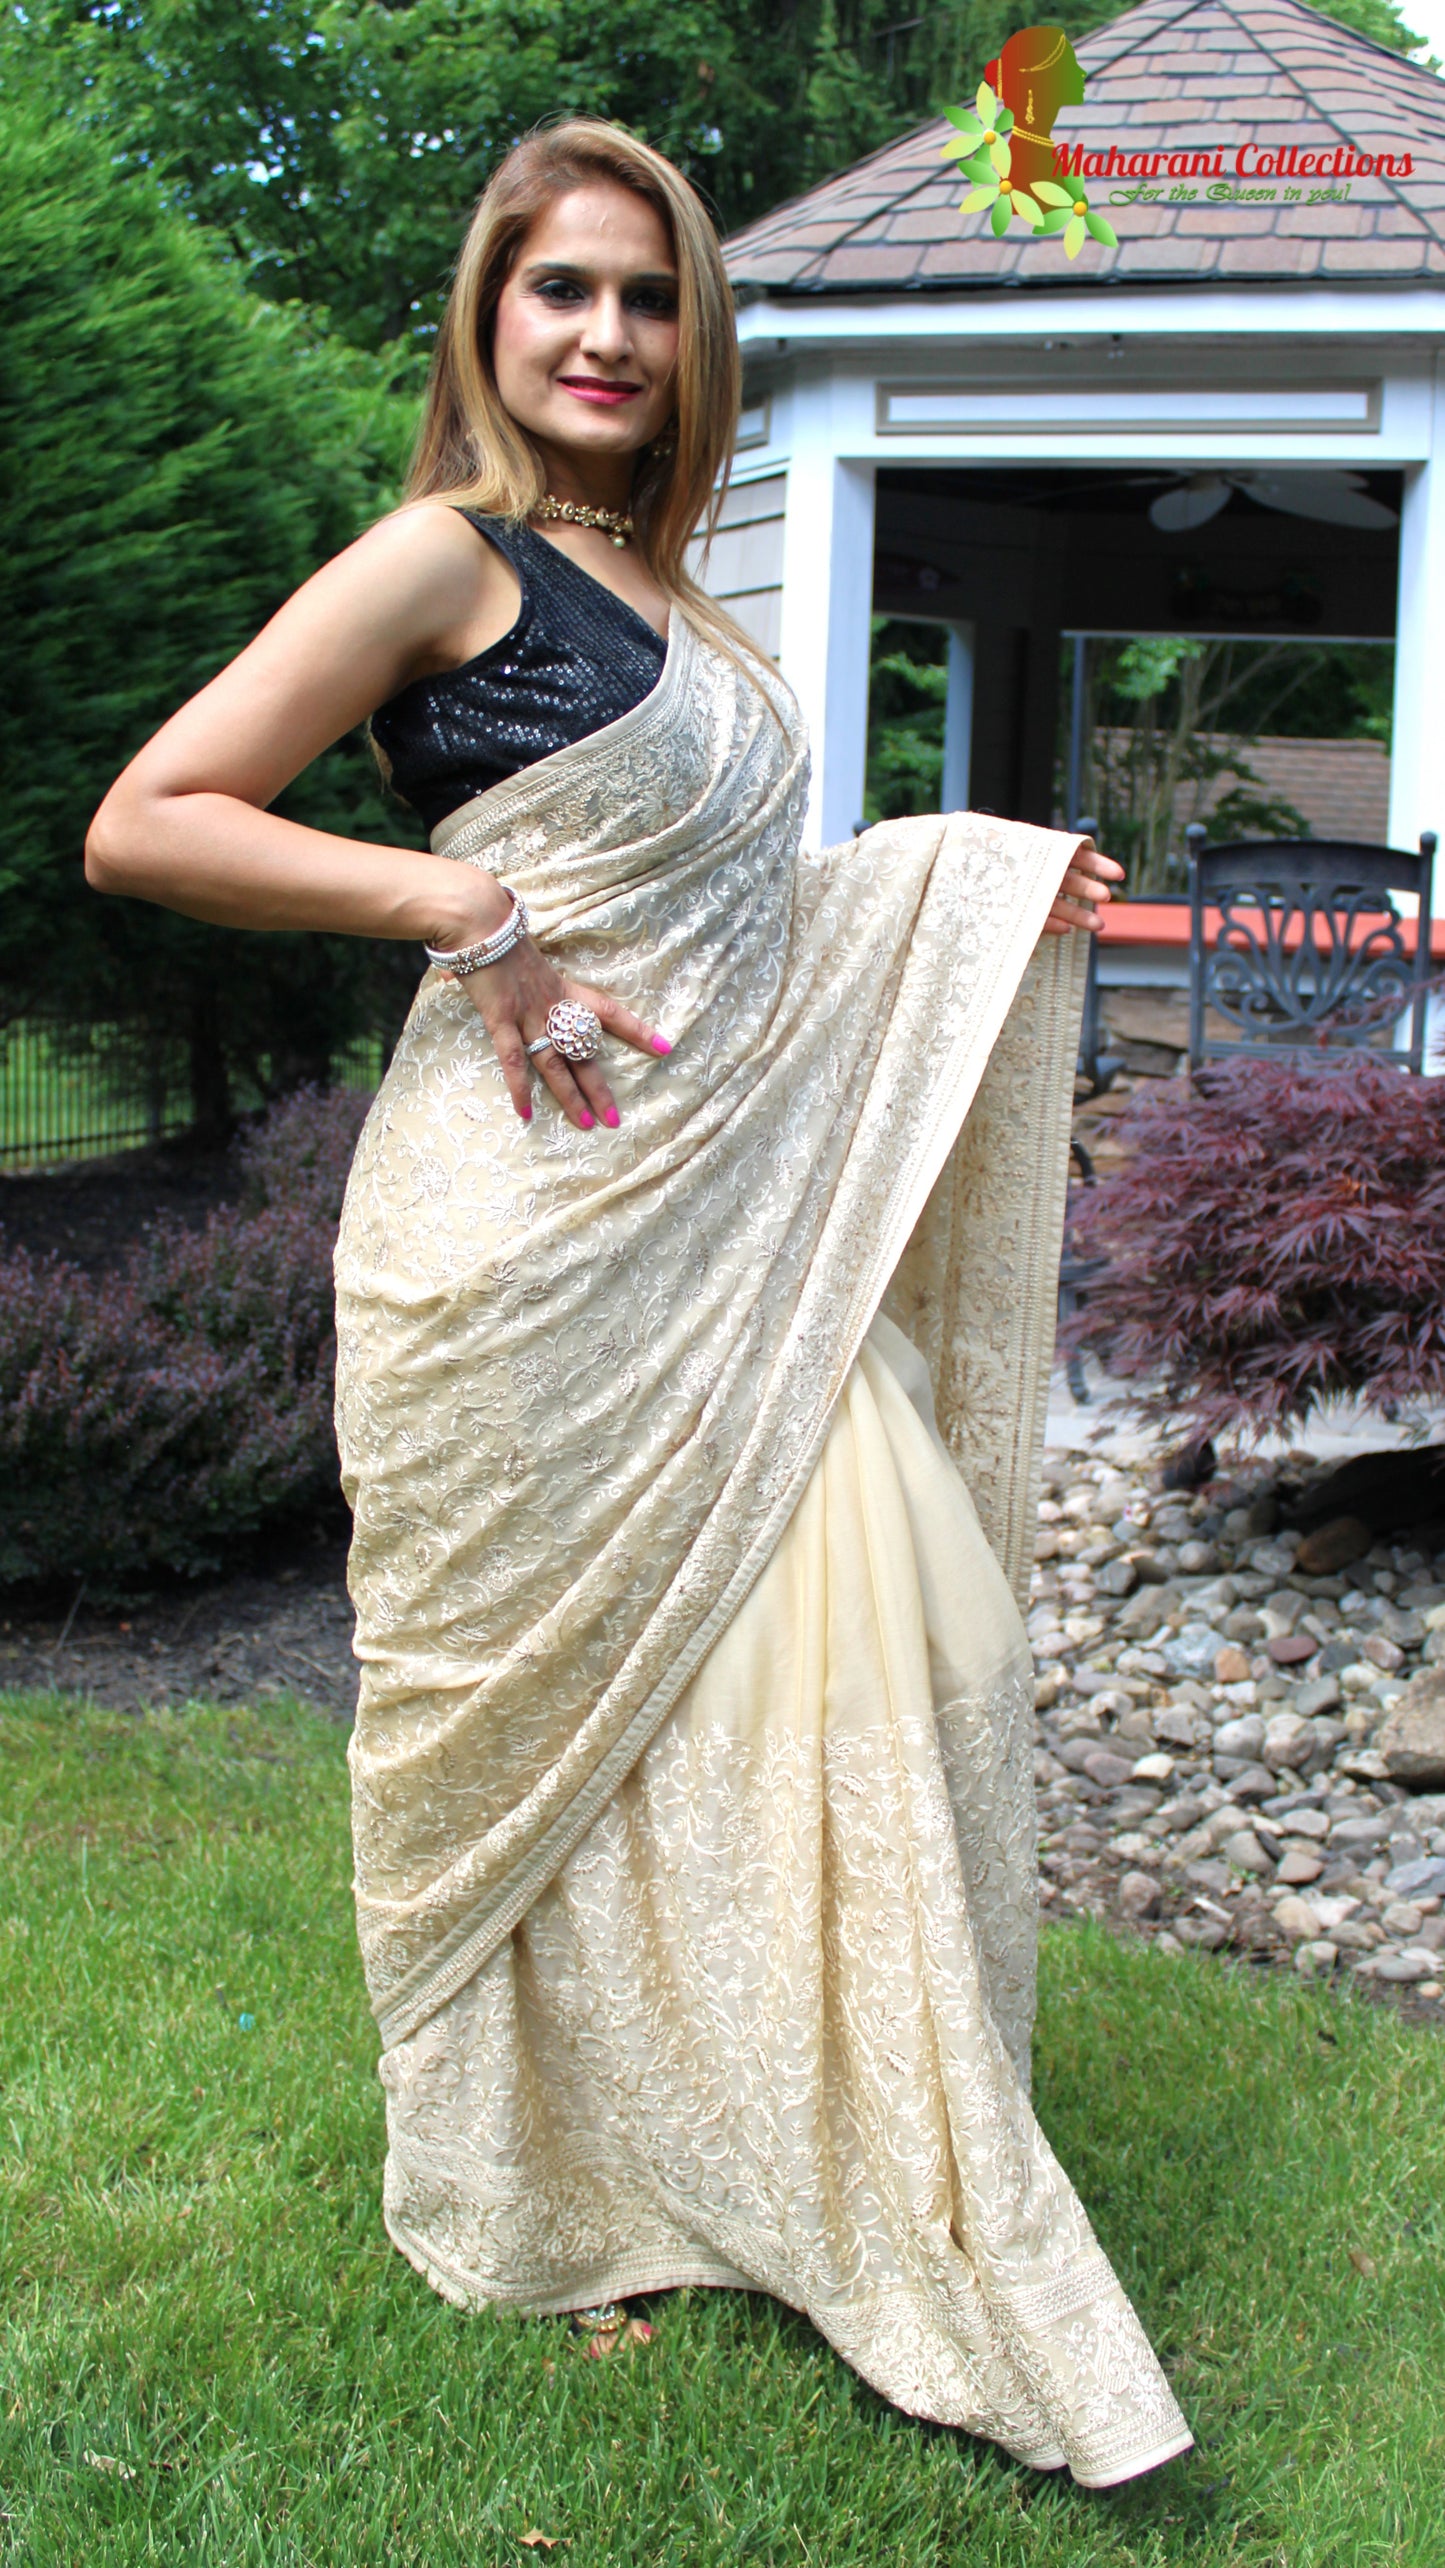 Maharani's Party Wear Georgette Heavy Zari Saree - Beige (with Stitched Blouse and Petticoat)